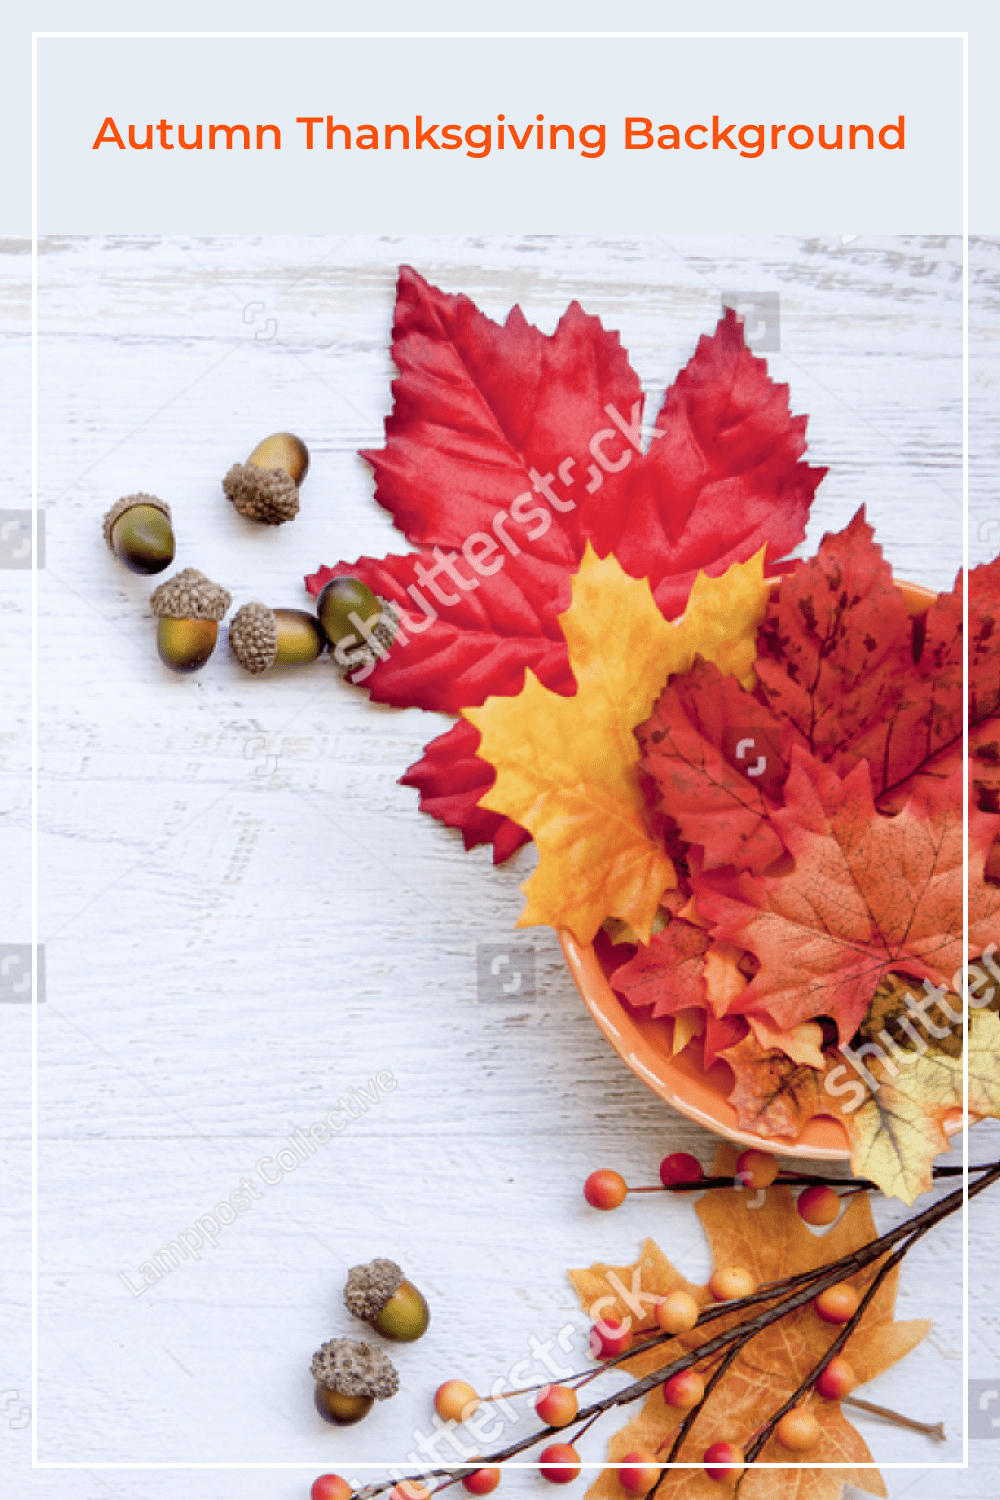 Cool autumn Thanksgiving background.